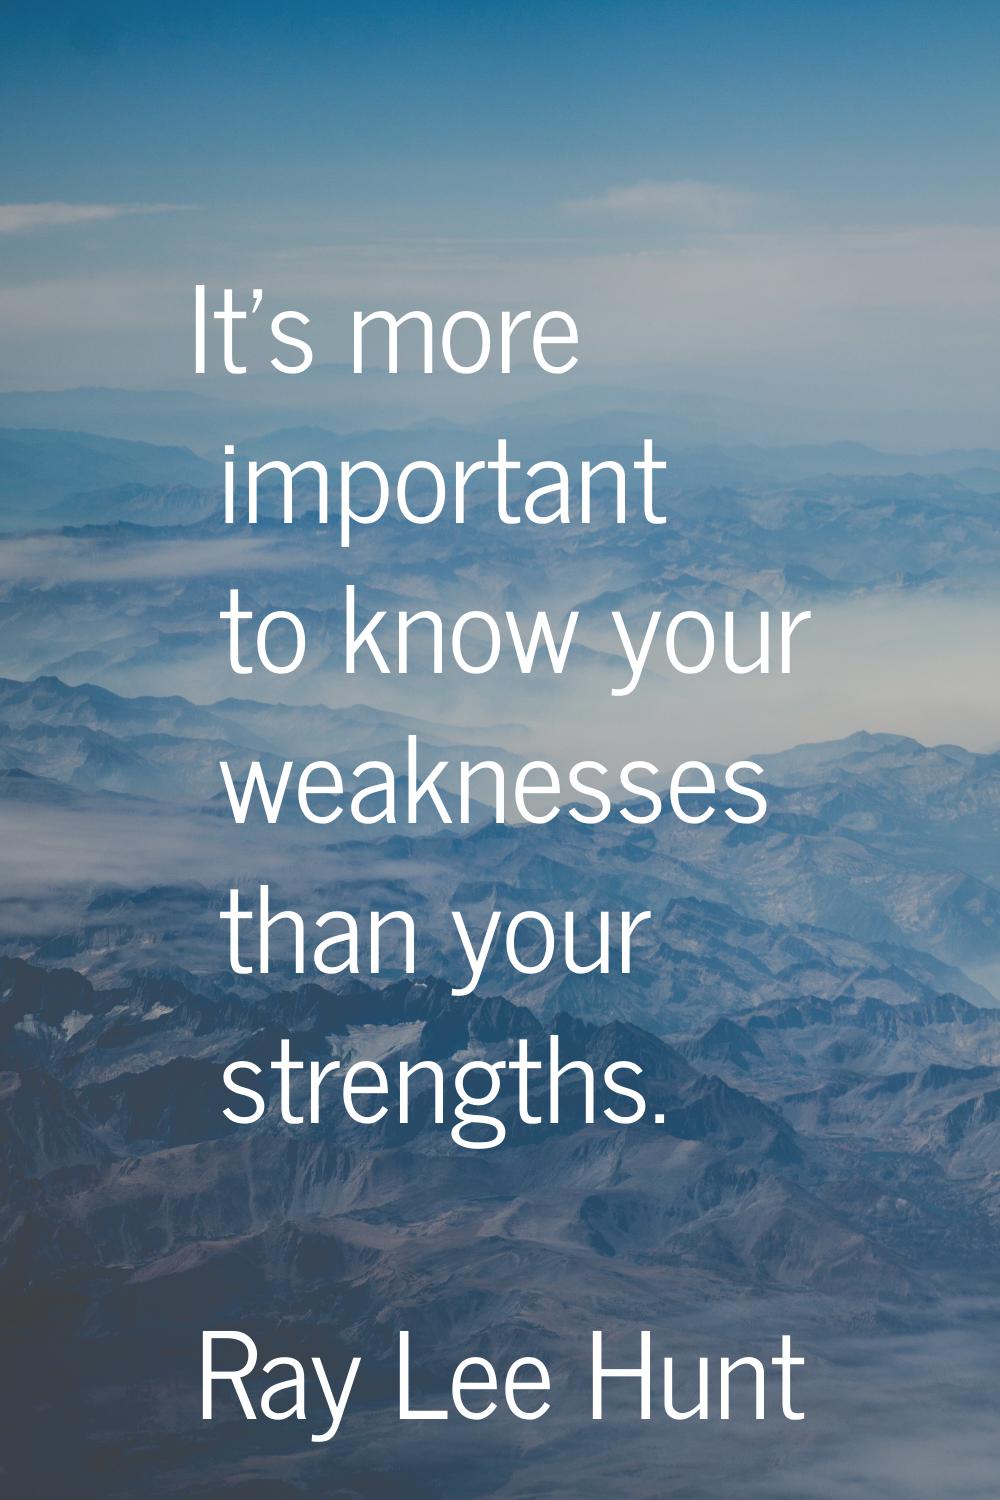 It's more important to know your weaknesses than your strengths.